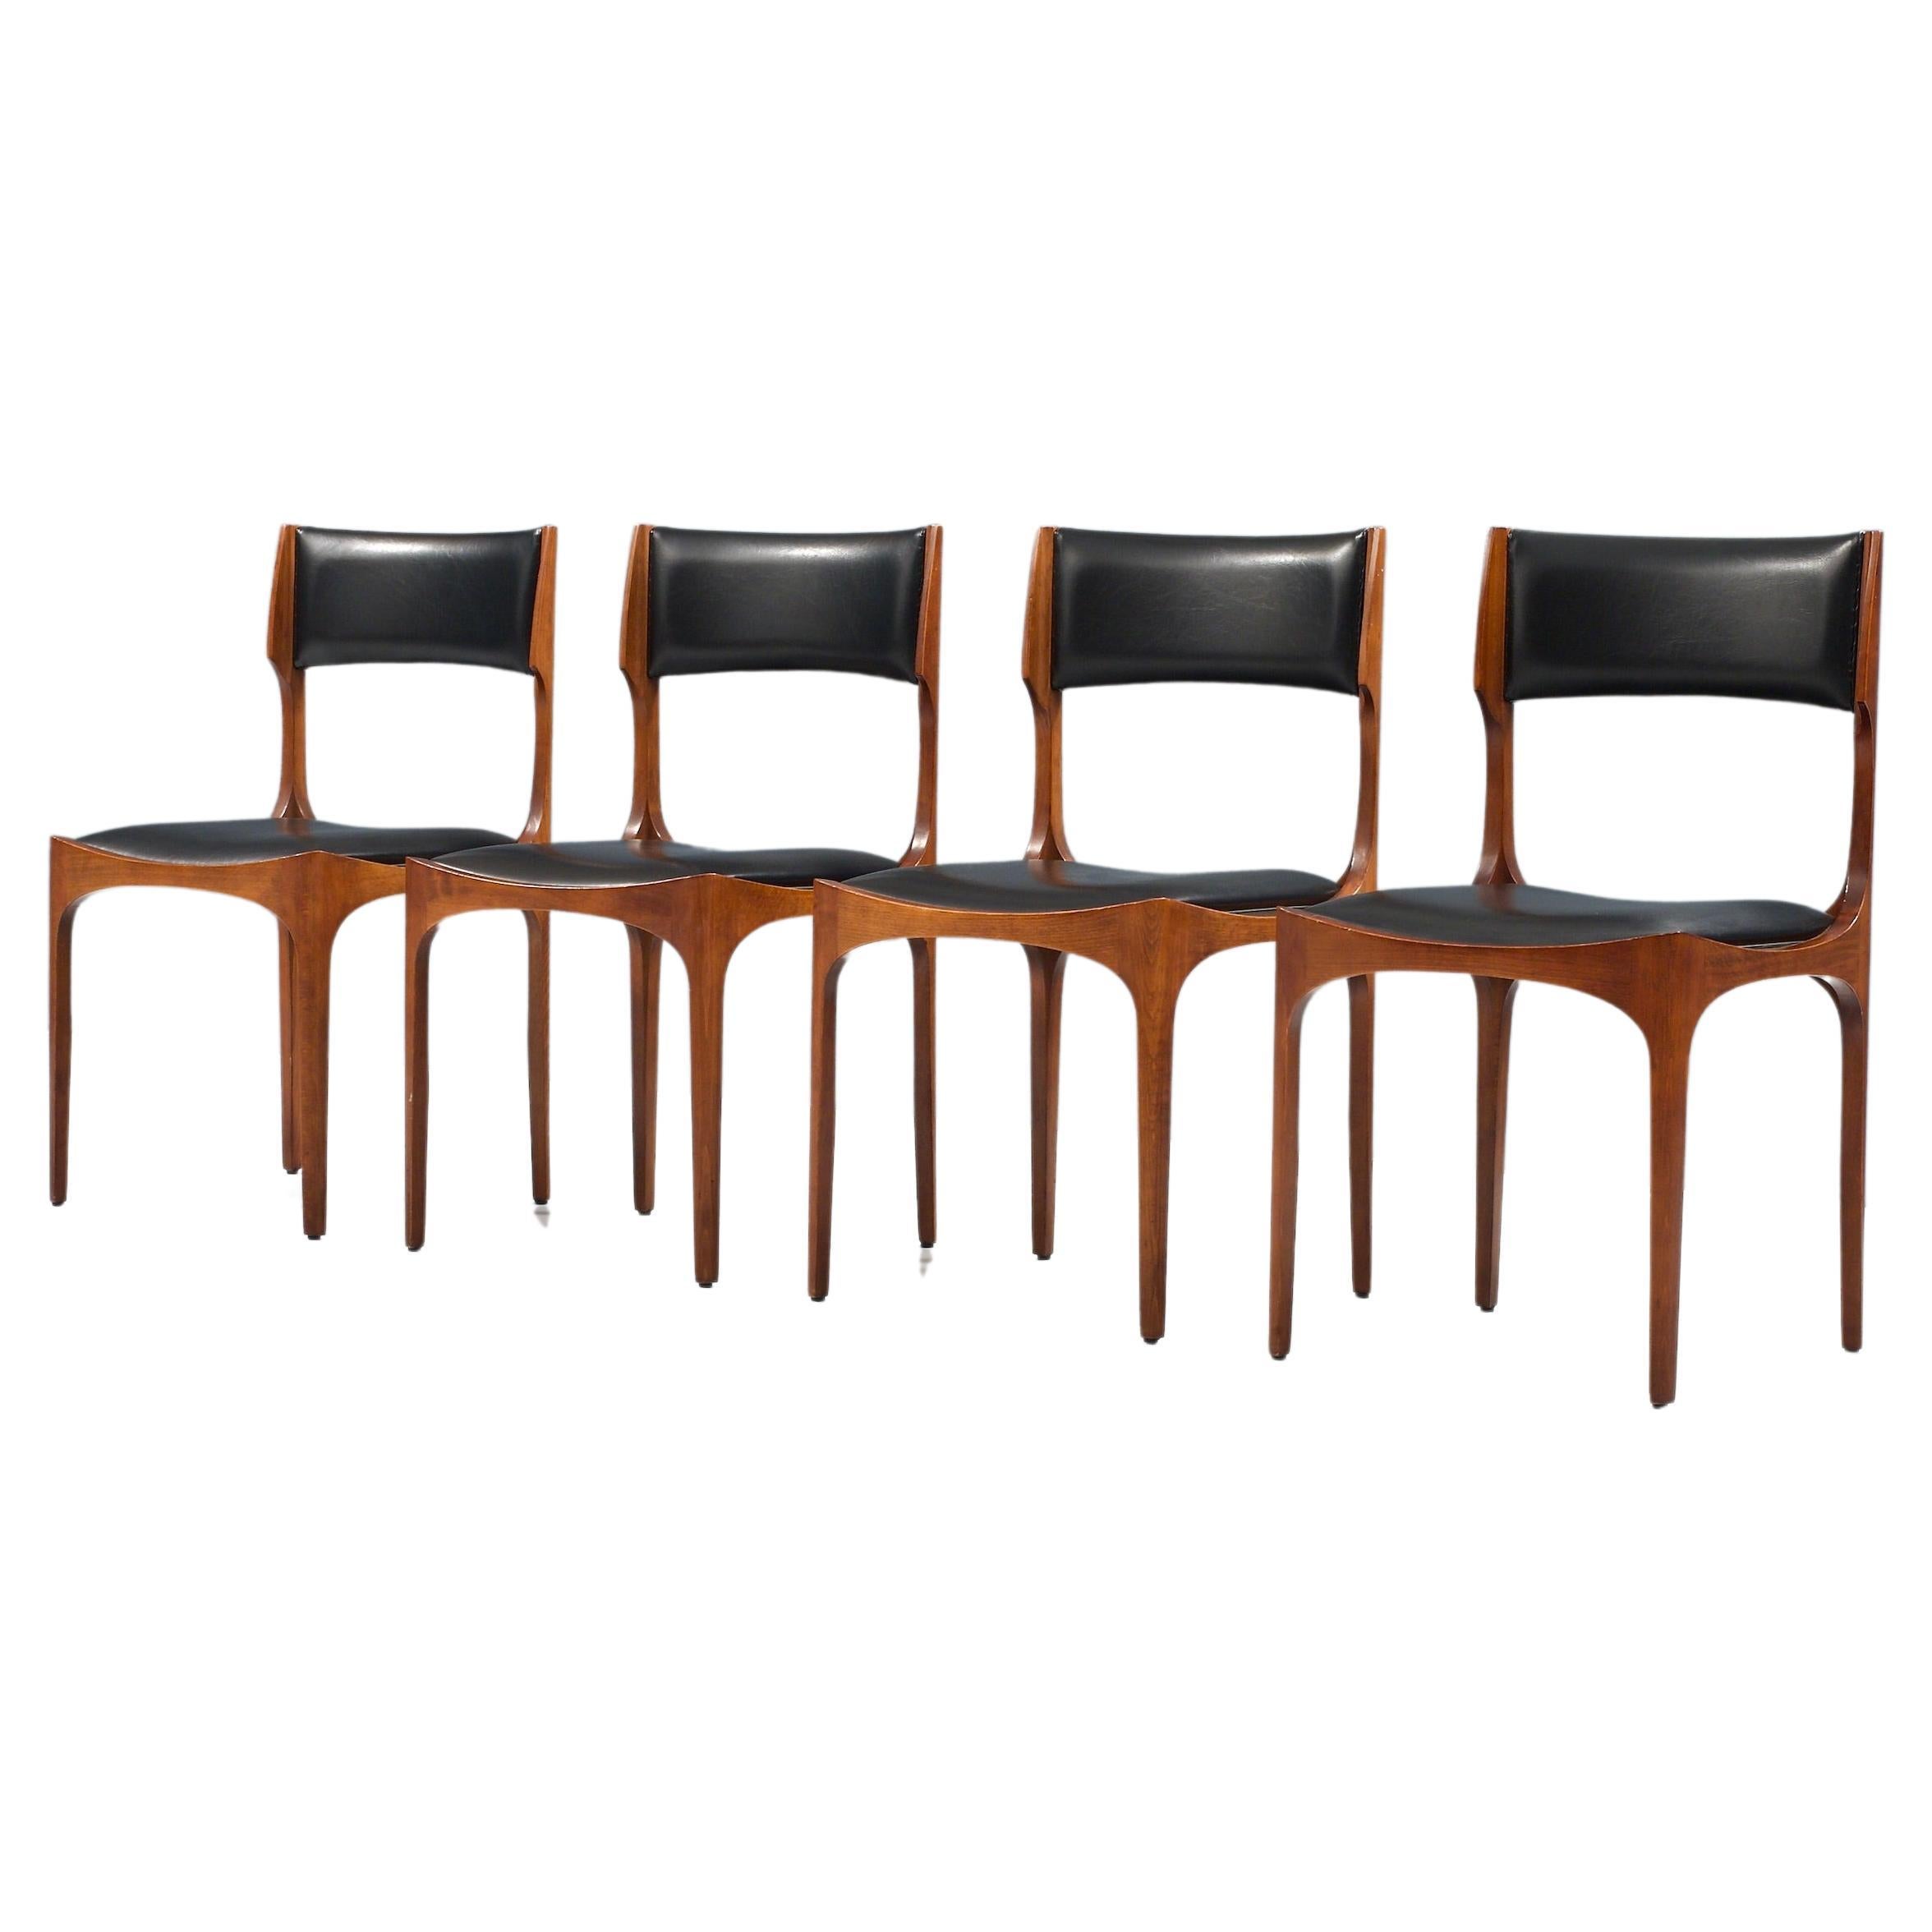 Set of 4 'Elisabetta' Diningroom Chairs by Giuseppe Gibelli, Italy, 1963 For Sale